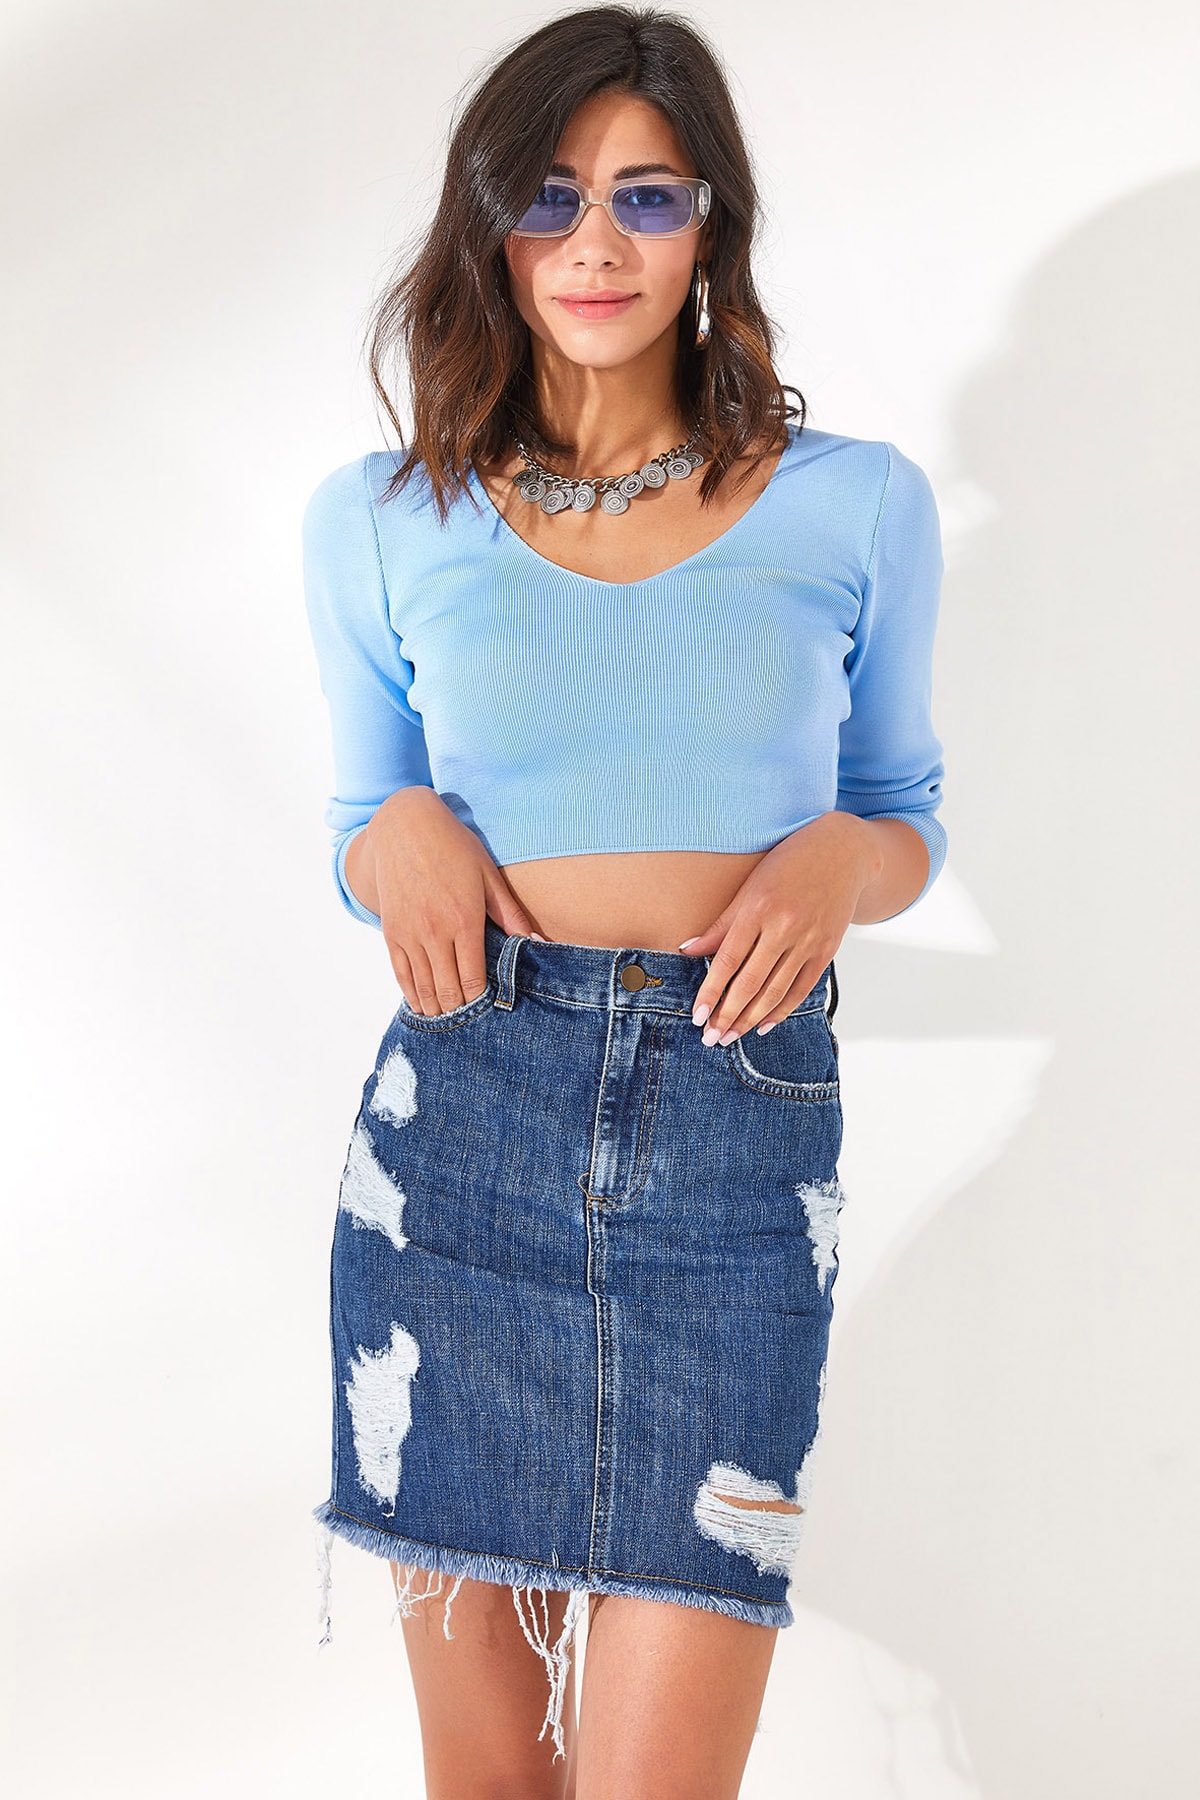 Olalook Women's Blue Mini Denim Skirt with Pockets and Torn Detail